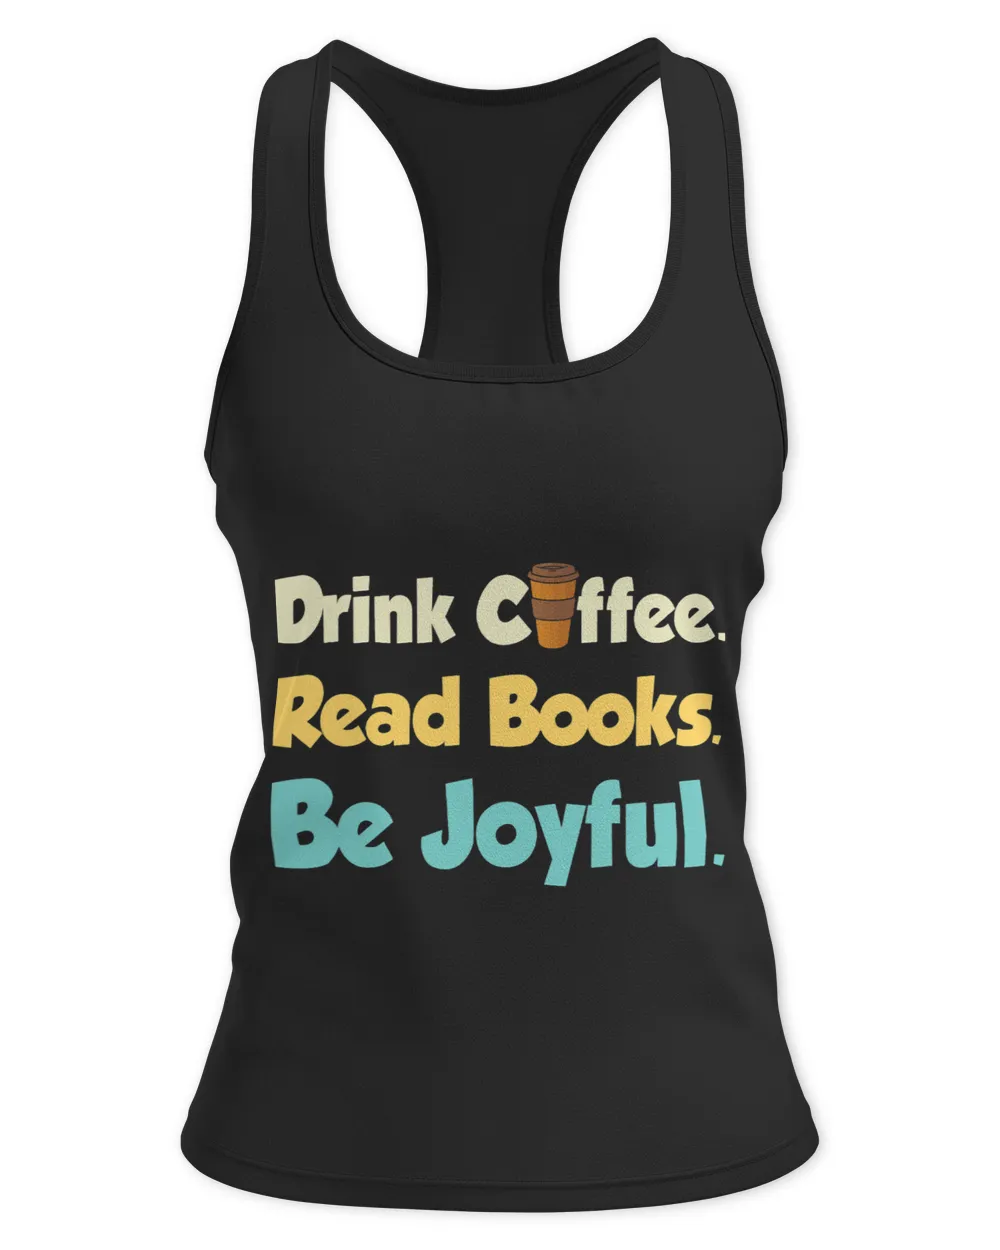 Book Drink Coffee Bookworm Barista Quote Saying